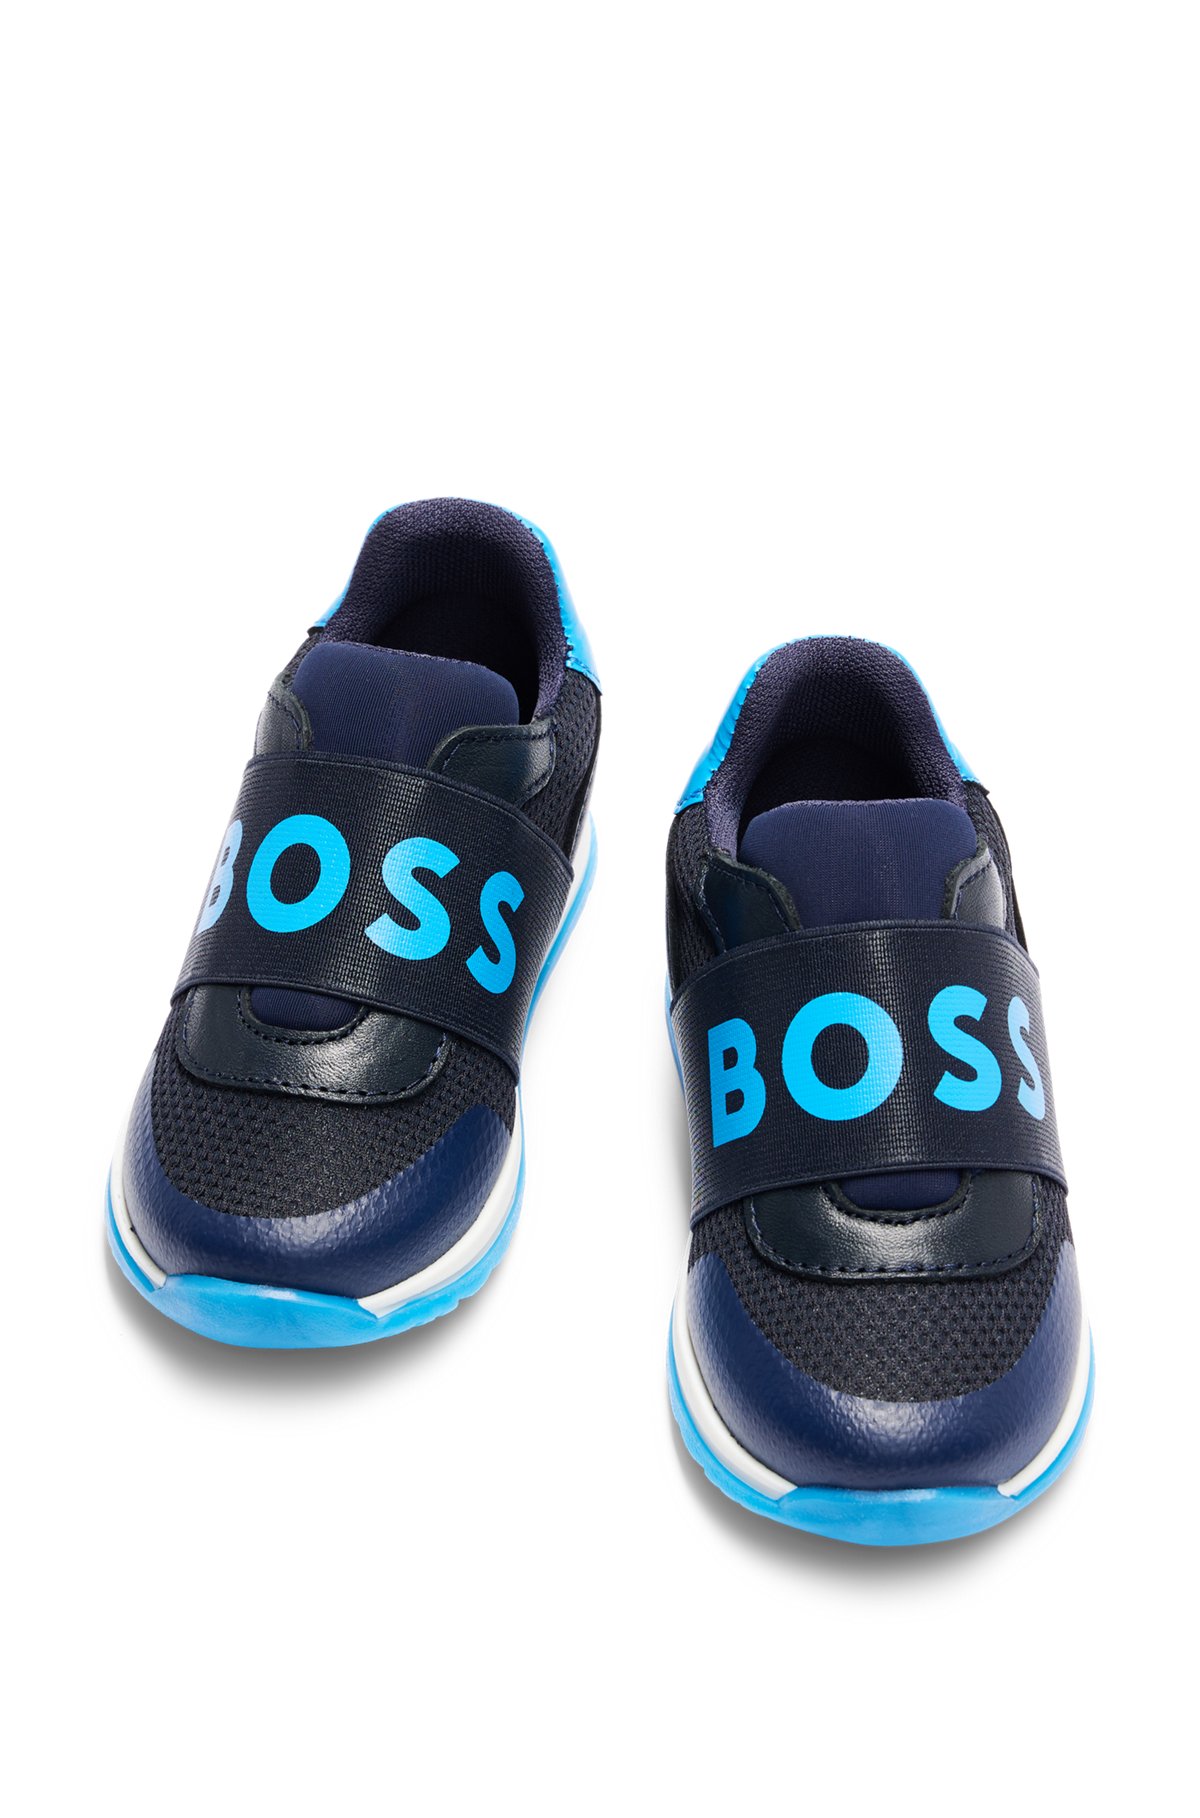 Kids' trainers in leather and mesh with branded strap, Dark Blue